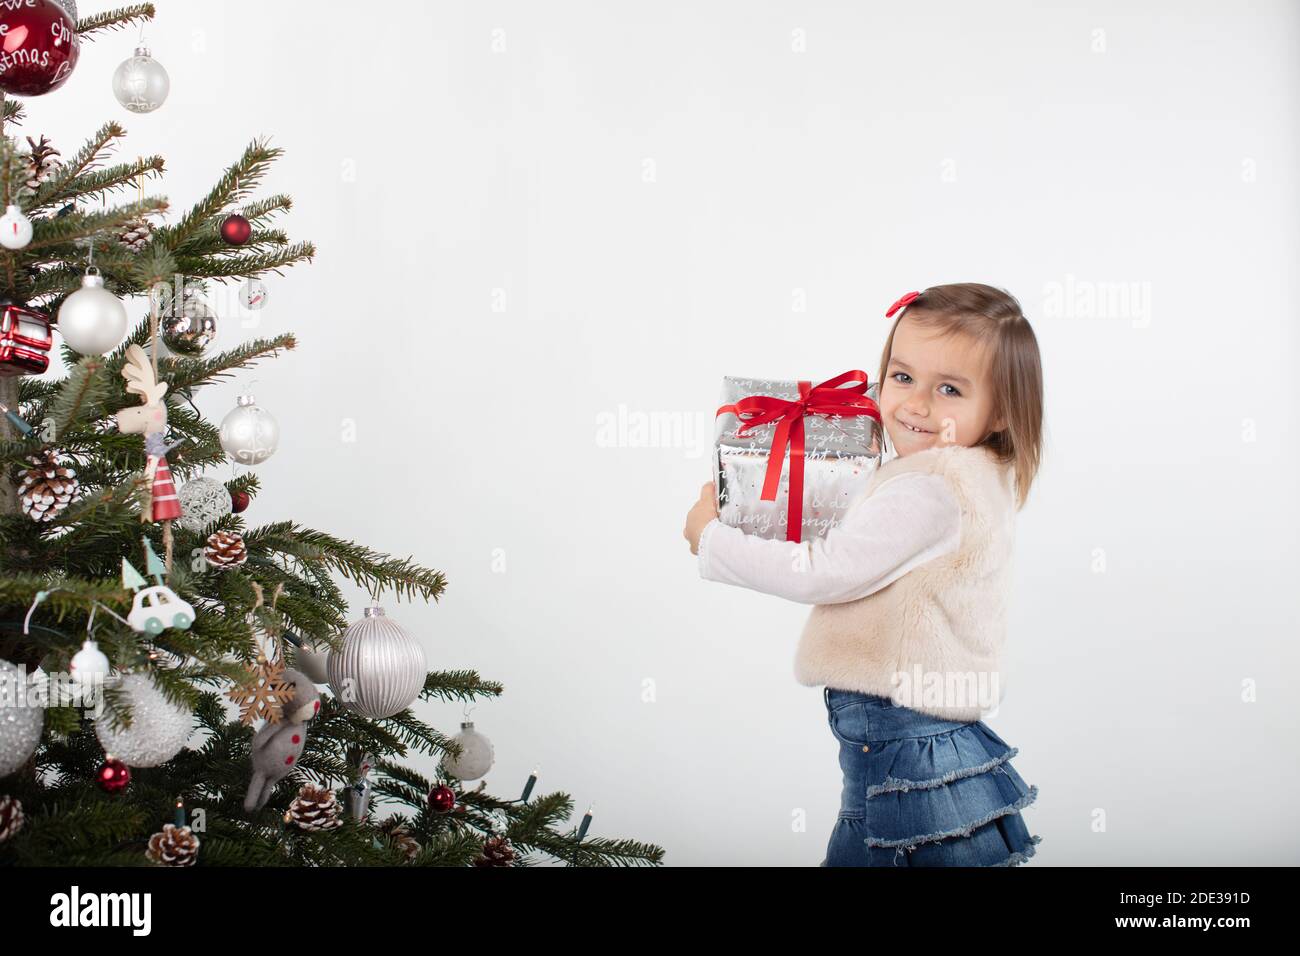 Smiling toddler girl holding tight her Christmas gift box. Merry Xmas! Stock Photo